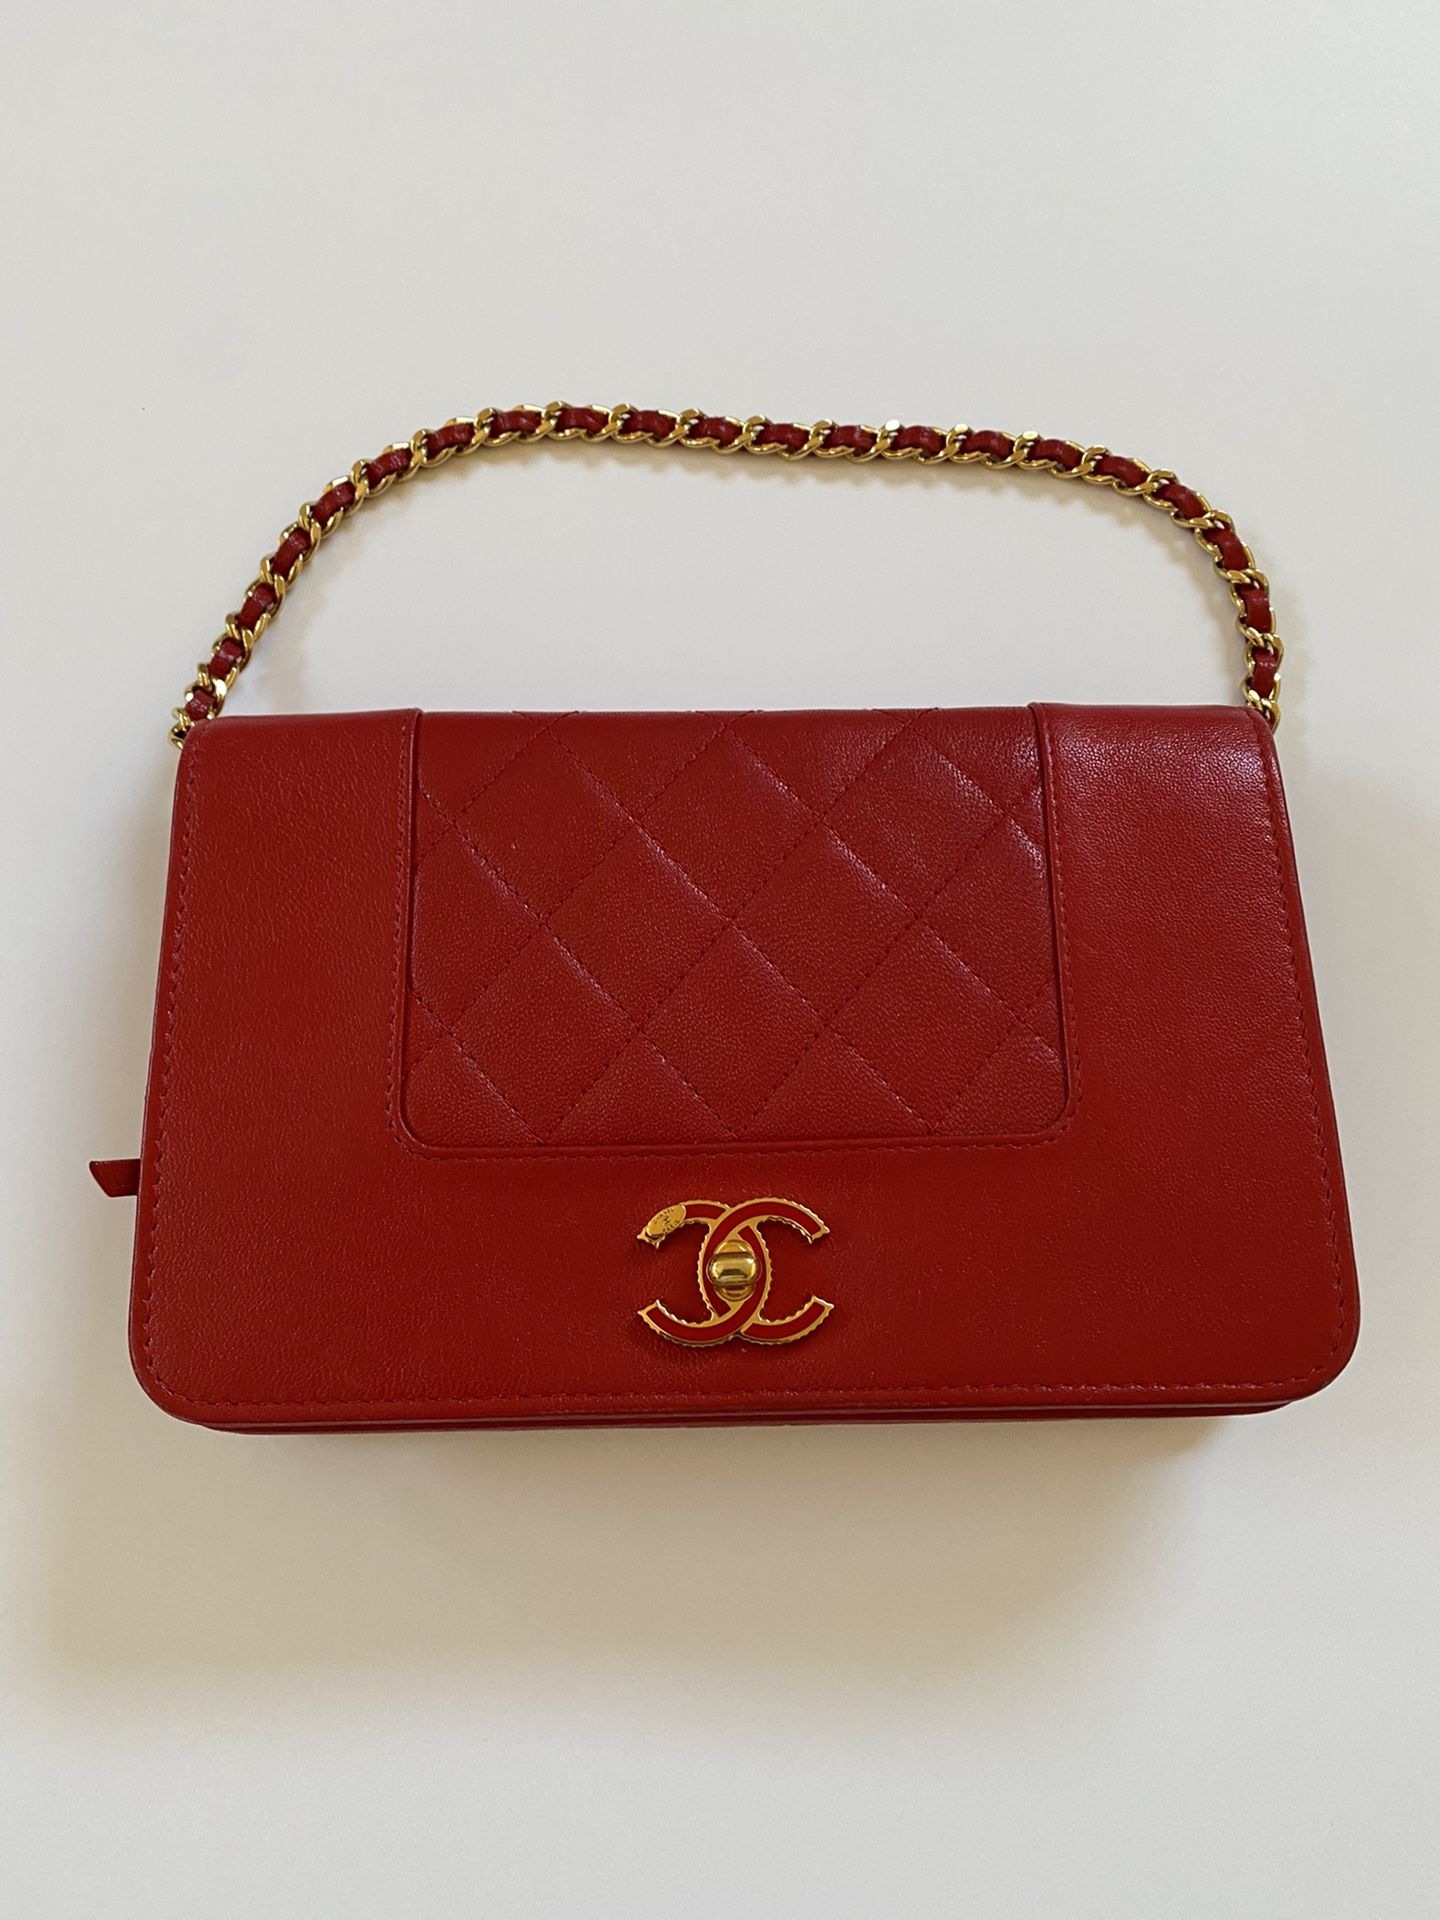 Red Chanel Purse Mademoiselle Vintage Wallet